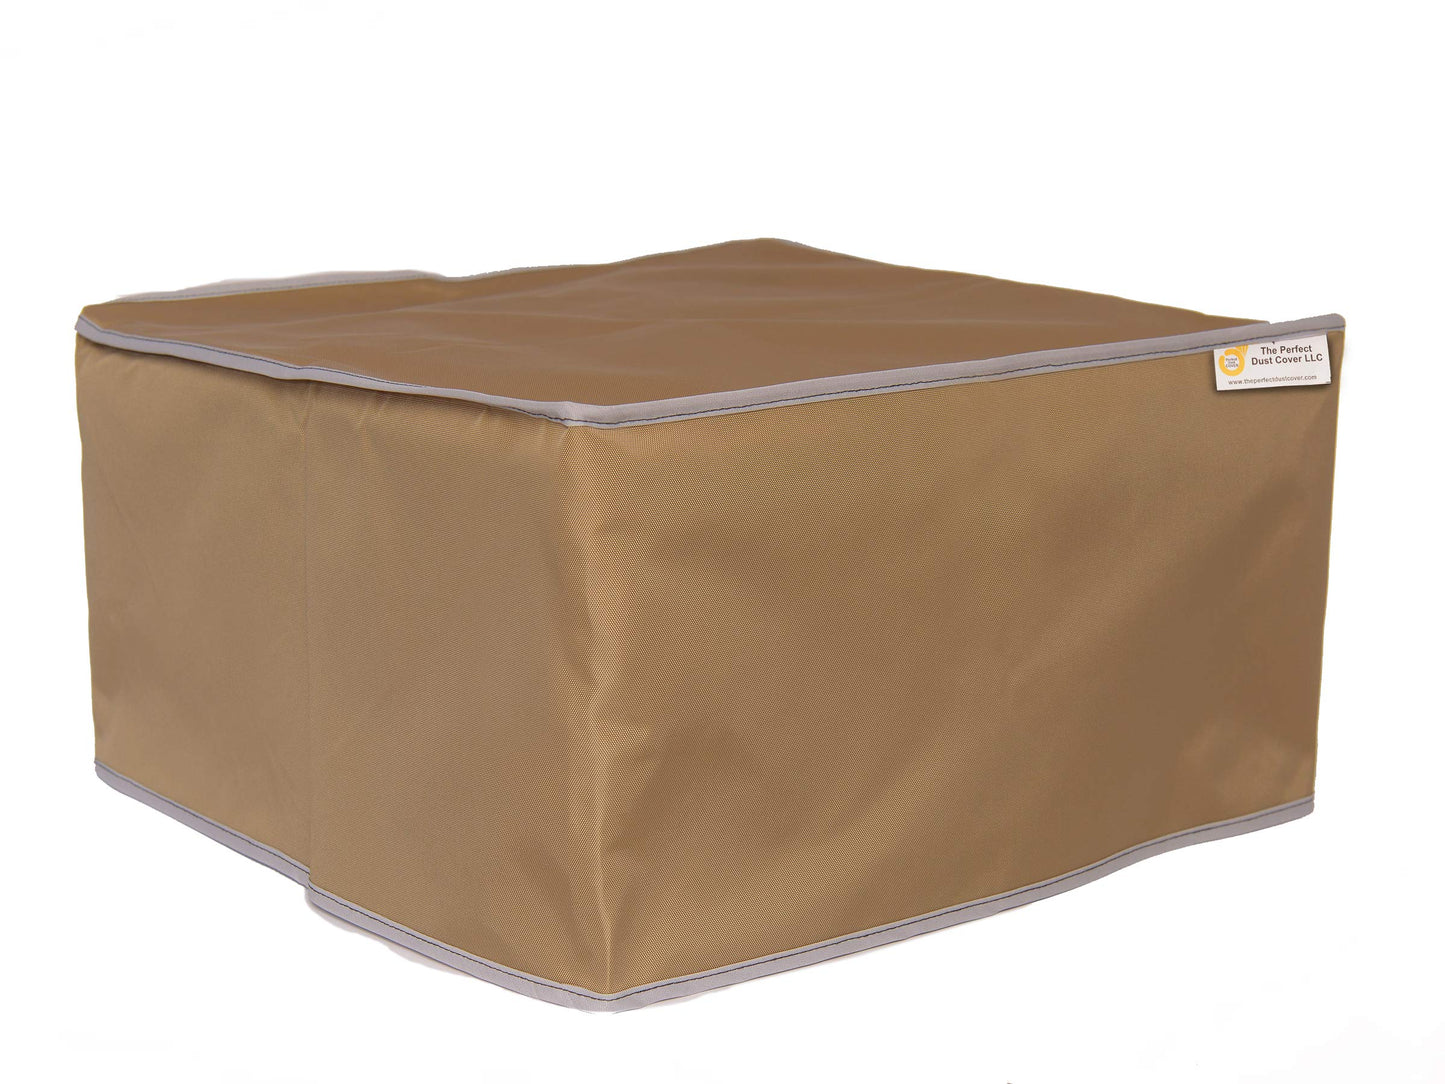 The Perfect Dust Cover, Tan Nylon Short Cover for Canon imagePROGRAF TA-30 36'' Large Format Printer, Anti Static and Waterproof Cover Dimensions 51''W x 34''D x 12''H by The Perfect Dust Cover LLC